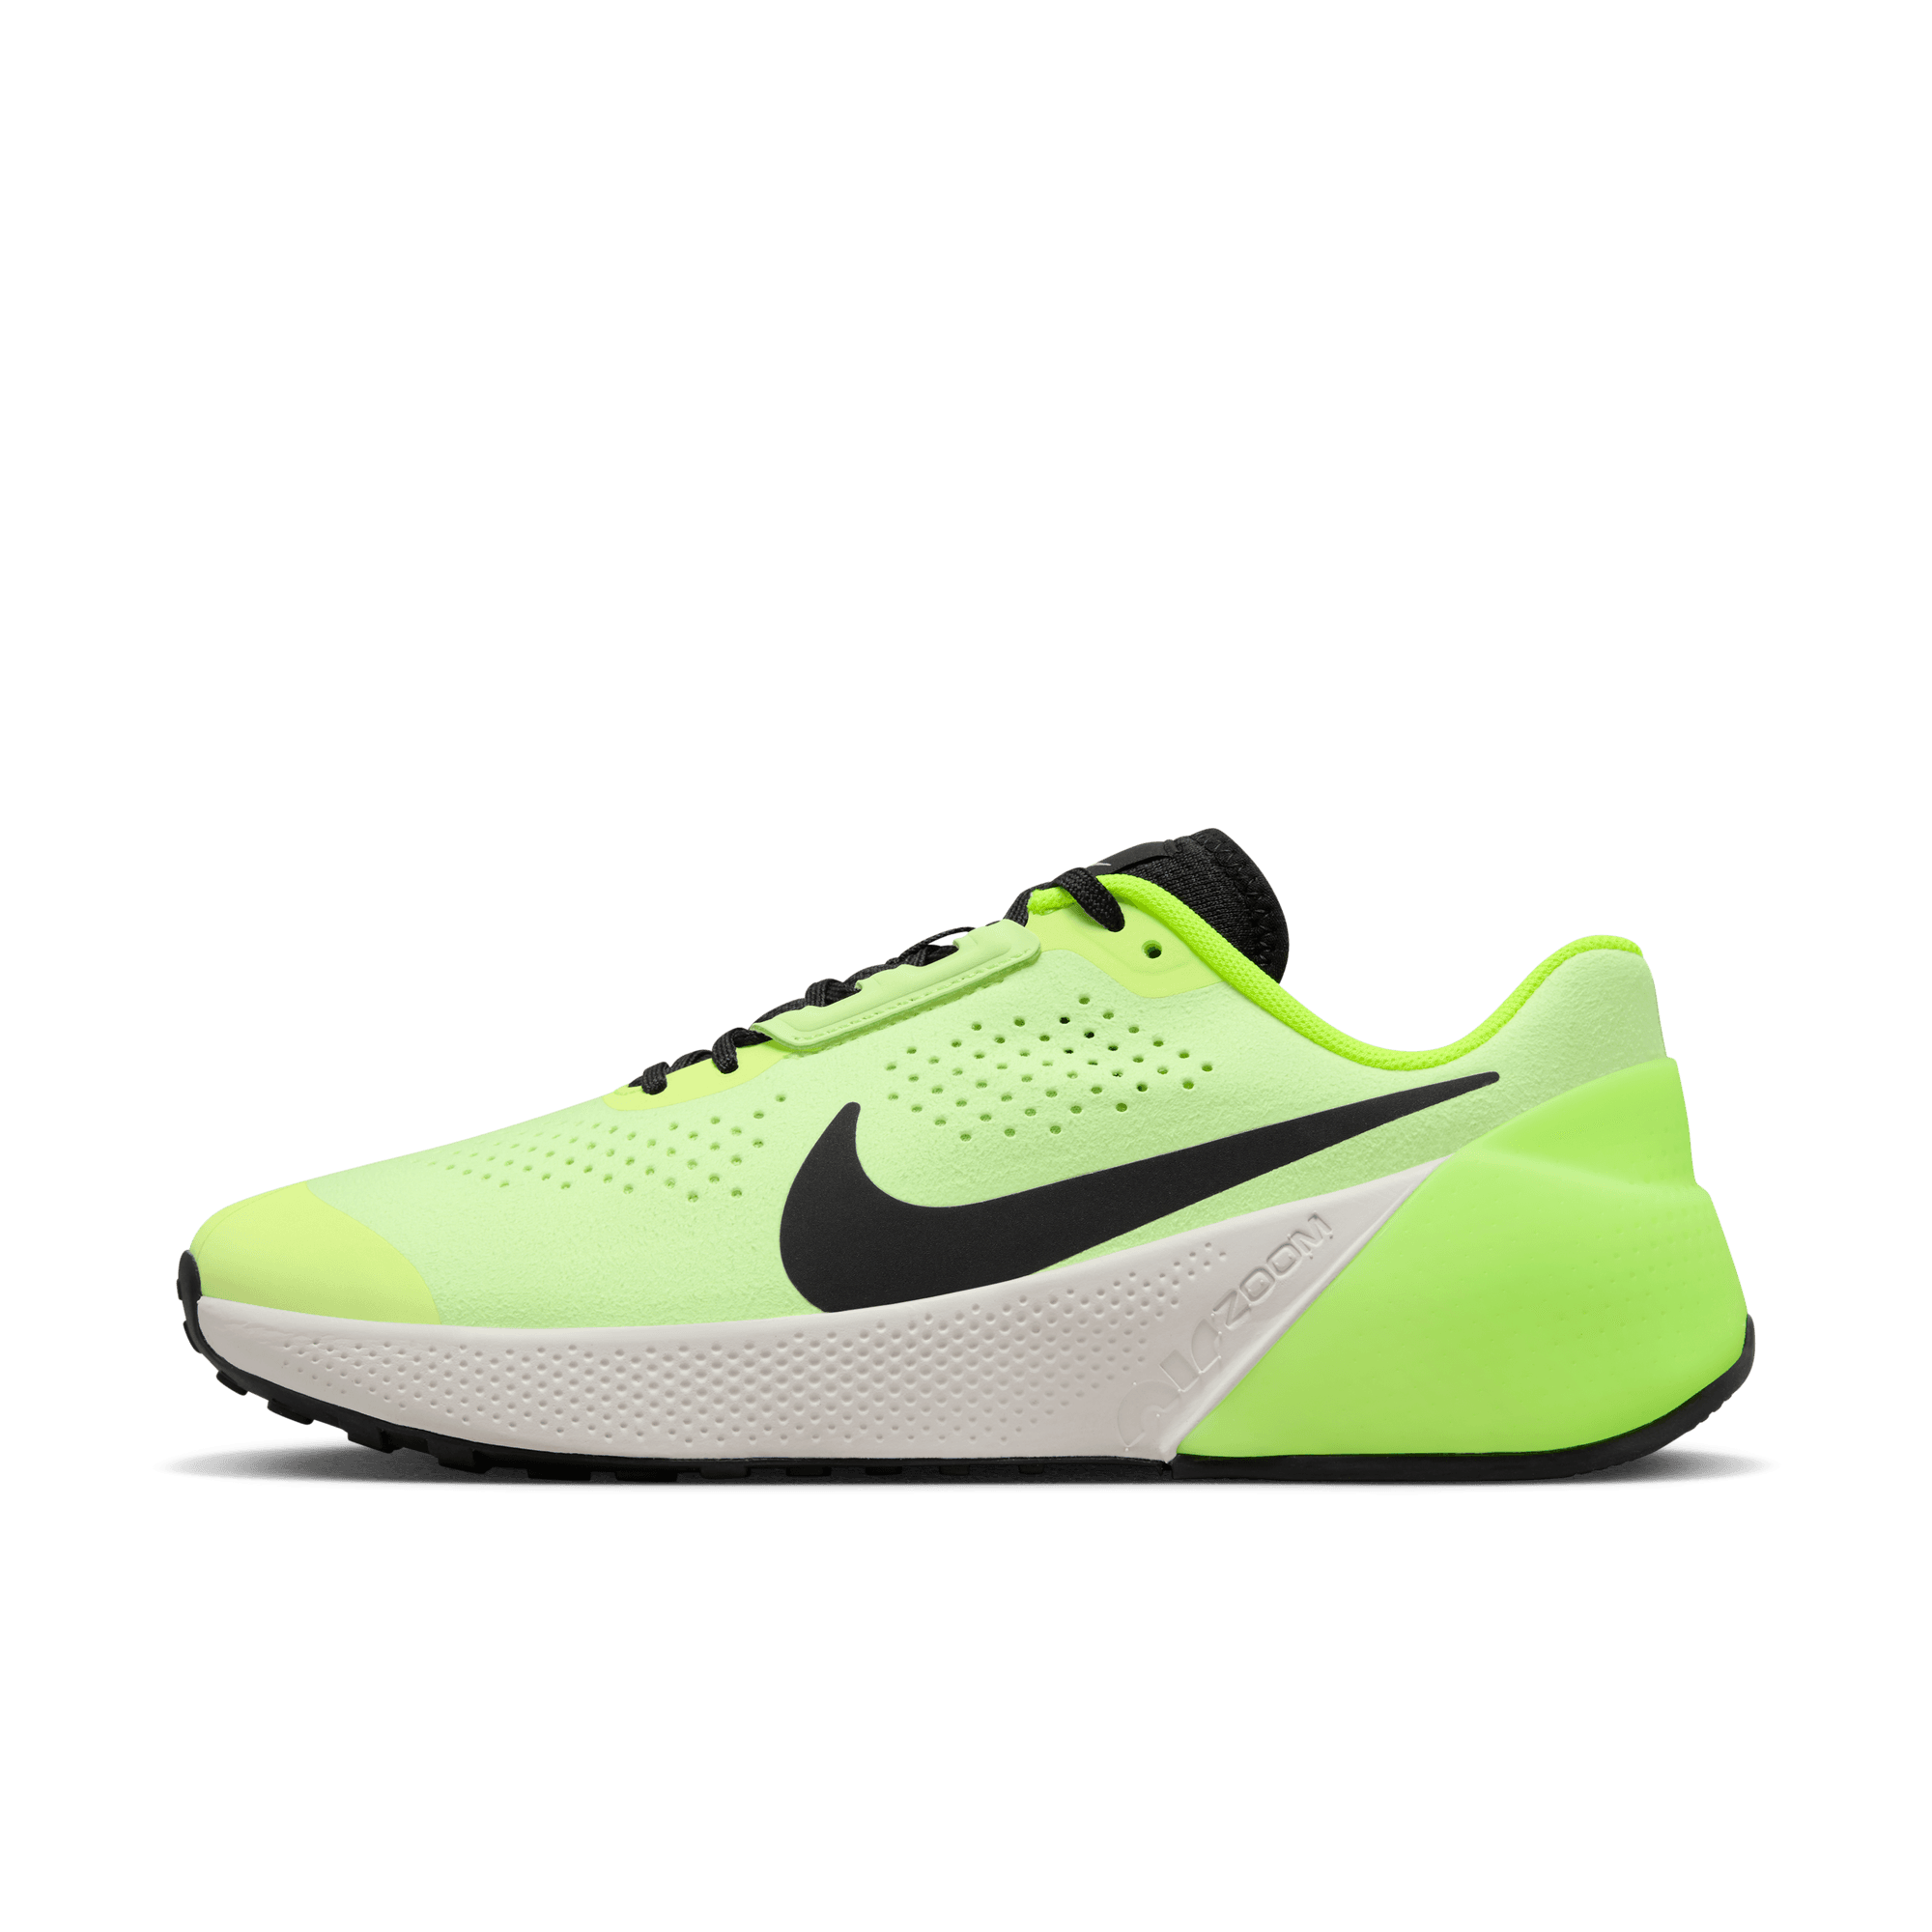 NIKE AIR ZOOM TR 1 MEN'S WORKOUT SHOES